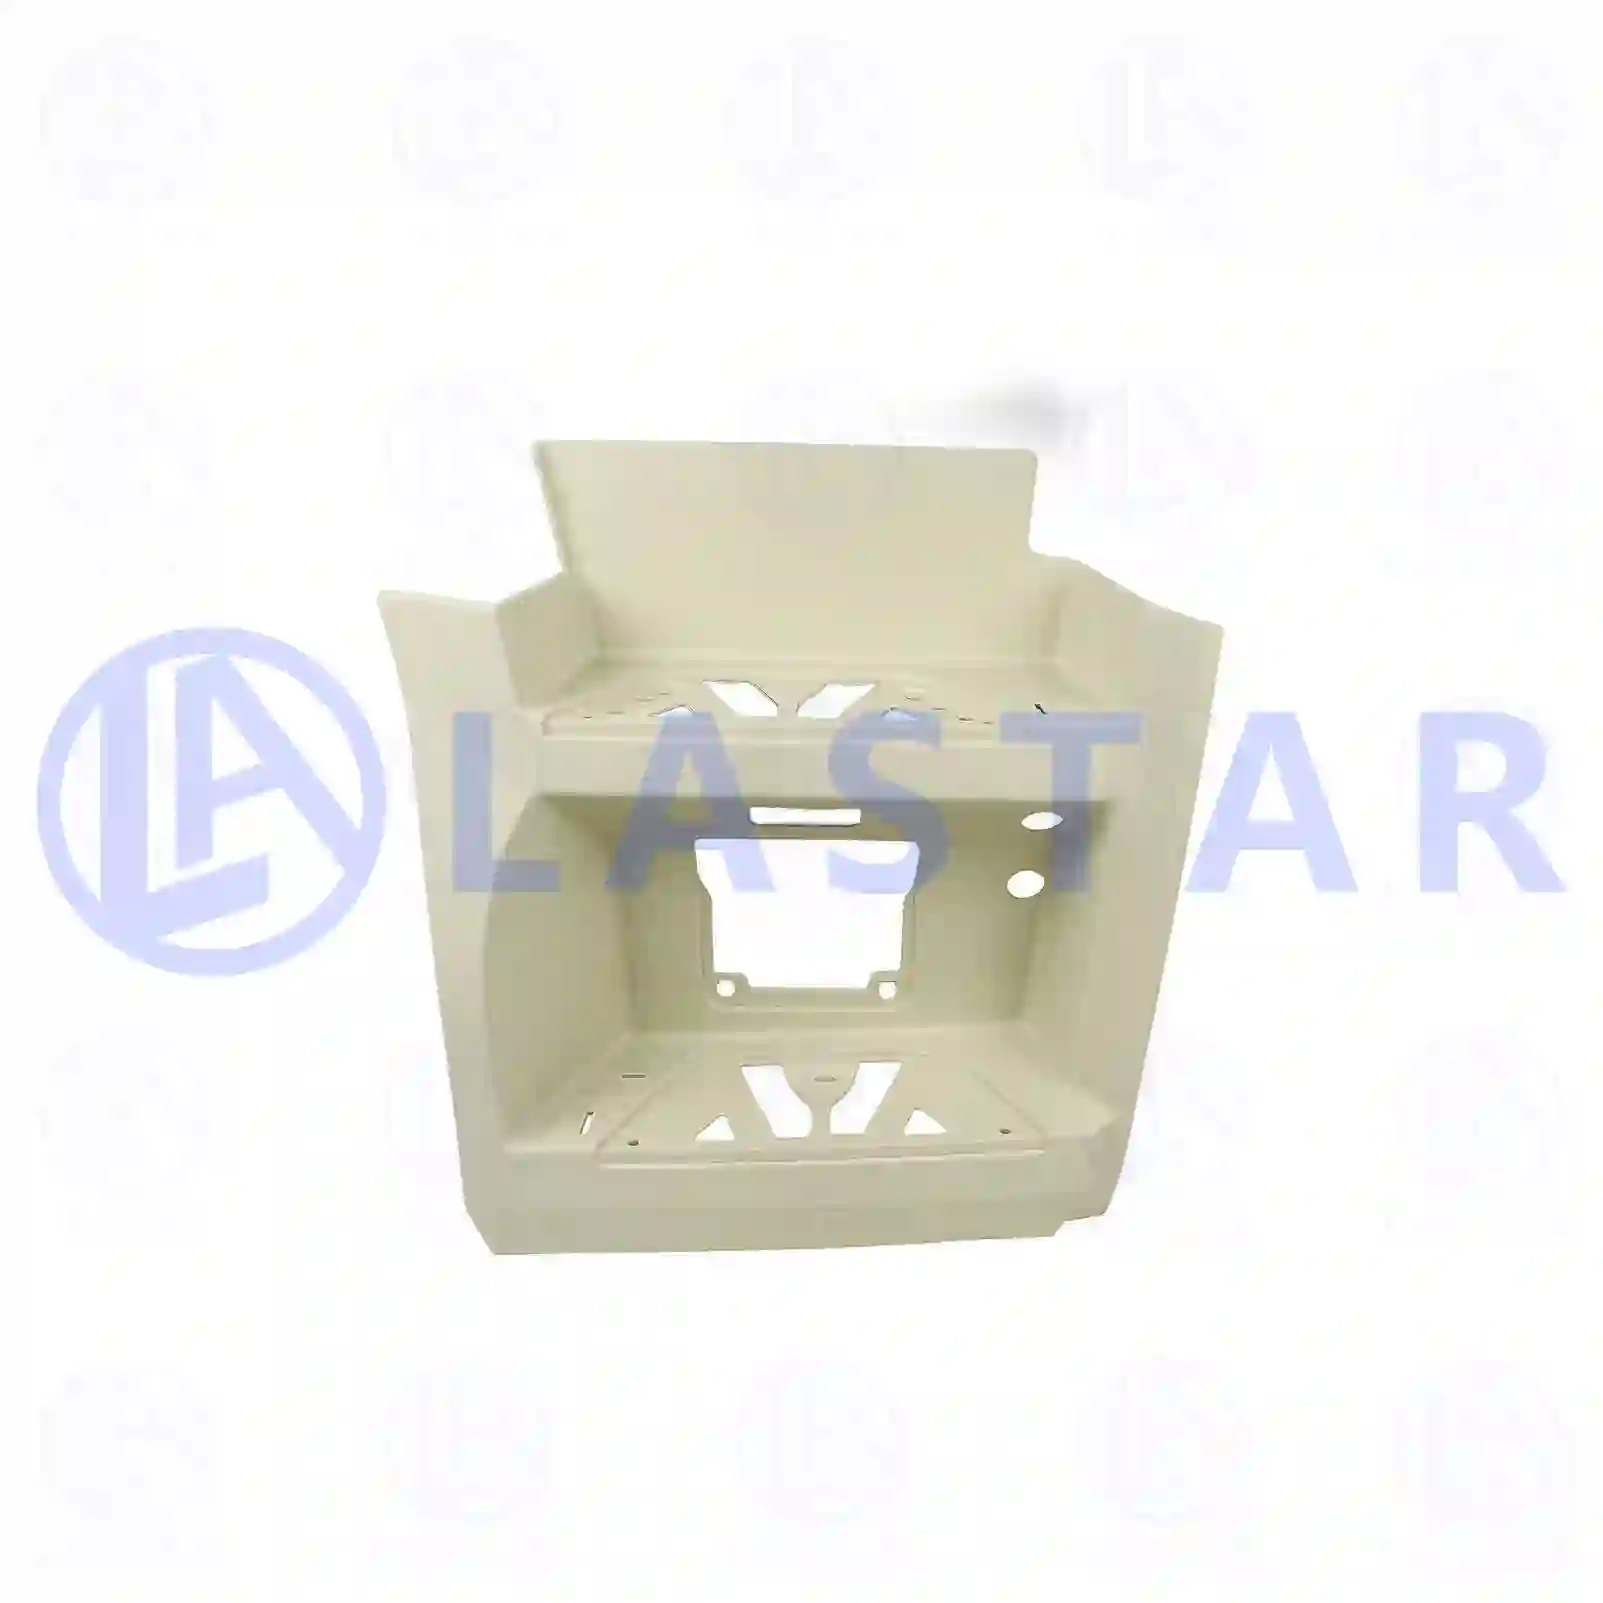 Step well case, right, white, 77719236, 9606661903, 9606662103, 9616661801, 9616661901 ||  77719236 Lastar Spare Part | Truck Spare Parts, Auotomotive Spare Parts Step well case, right, white, 77719236, 9606661903, 9606662103, 9616661801, 9616661901 ||  77719236 Lastar Spare Part | Truck Spare Parts, Auotomotive Spare Parts